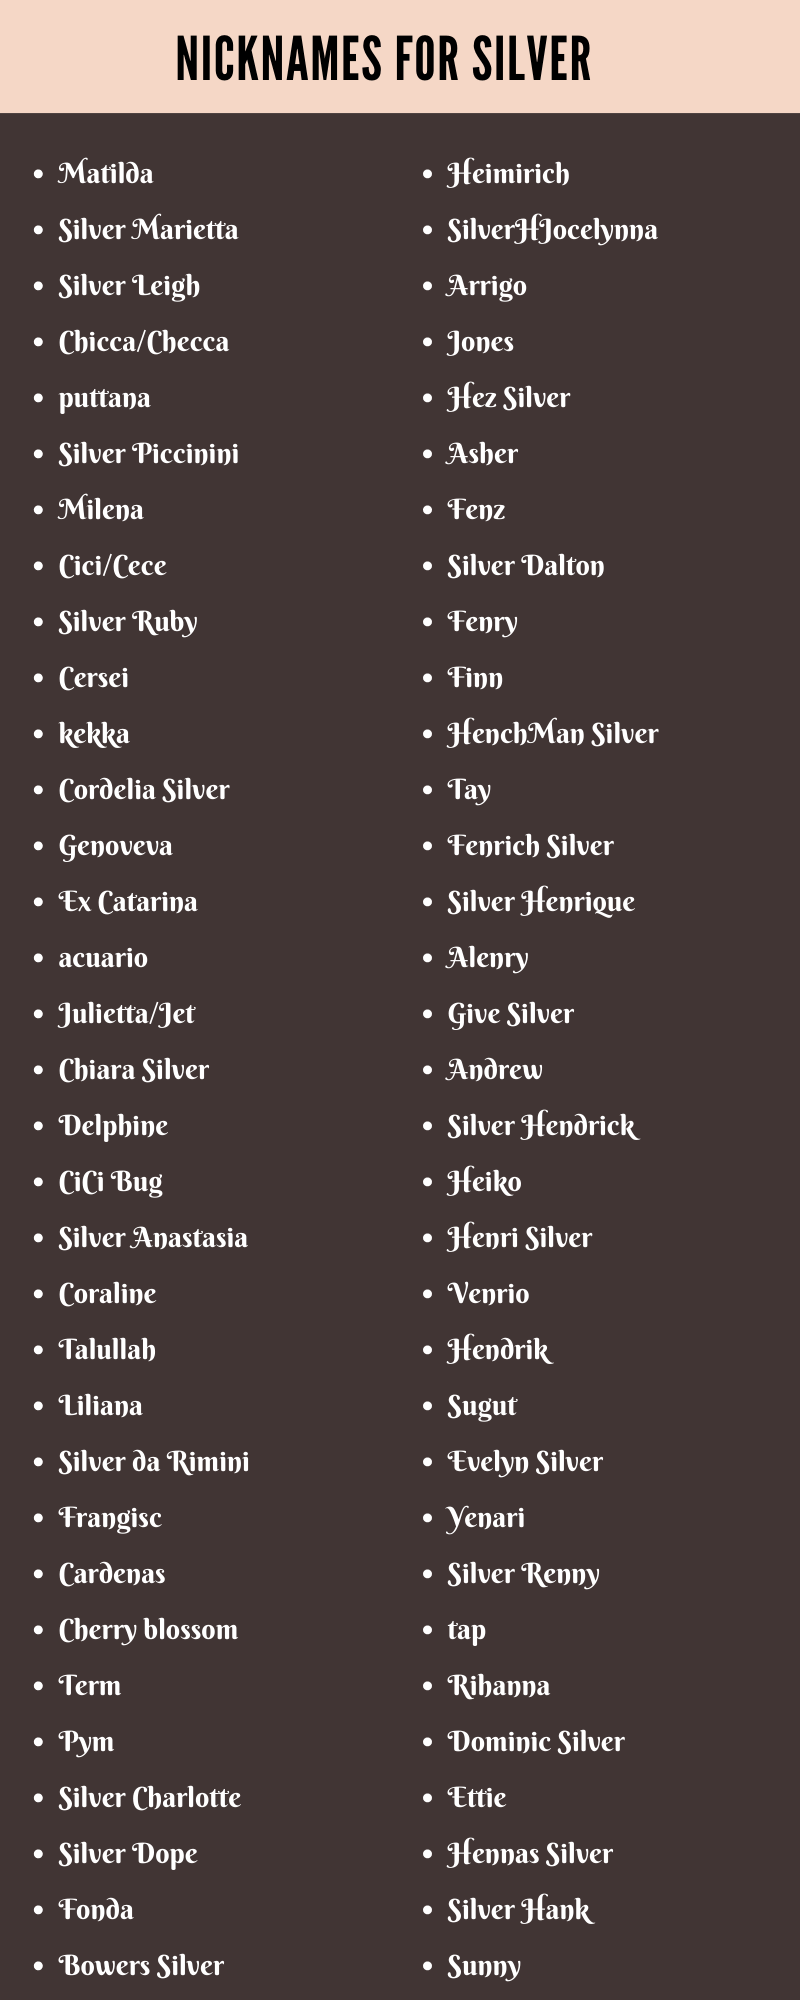 Nicknames for Silver